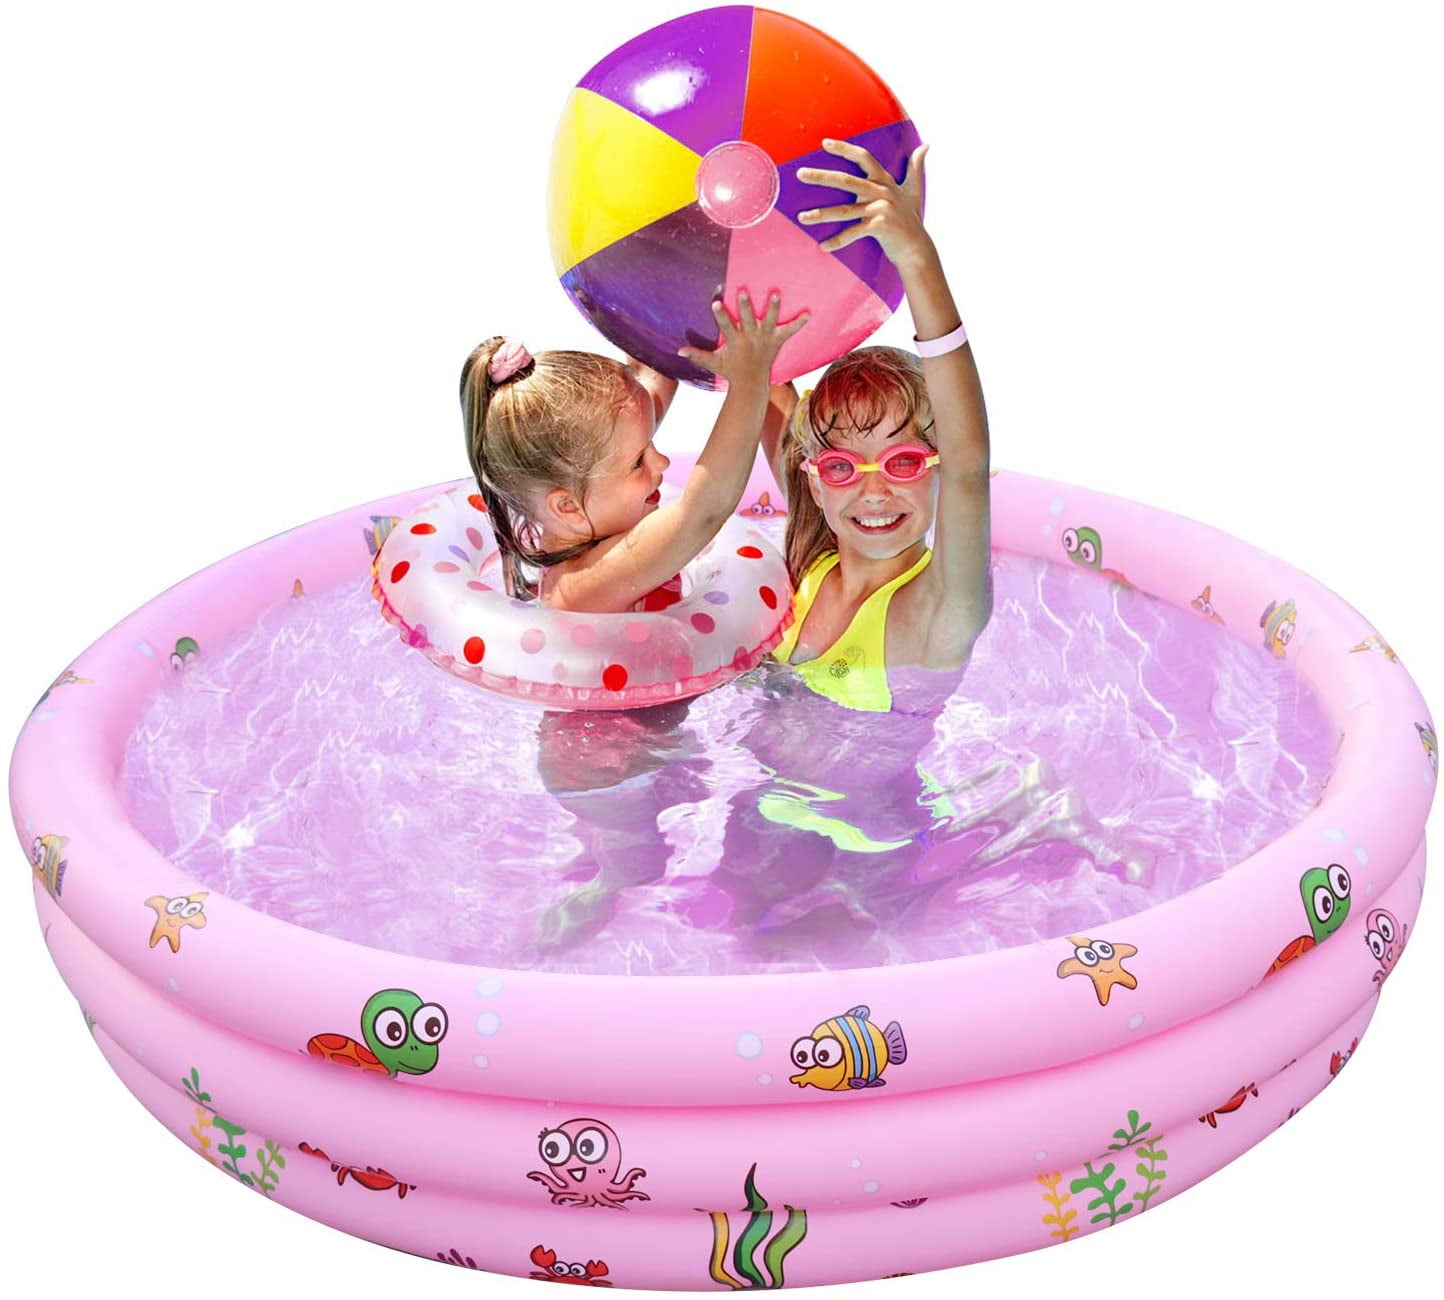 Quick & Easy Set Kids & Adults To Have Outdoor Water Fun With Floats & Toys But Light & Portable Pump Included. Blow Up pool This Above Ground Inflatable Swimming Pool Is Great For Family Big 